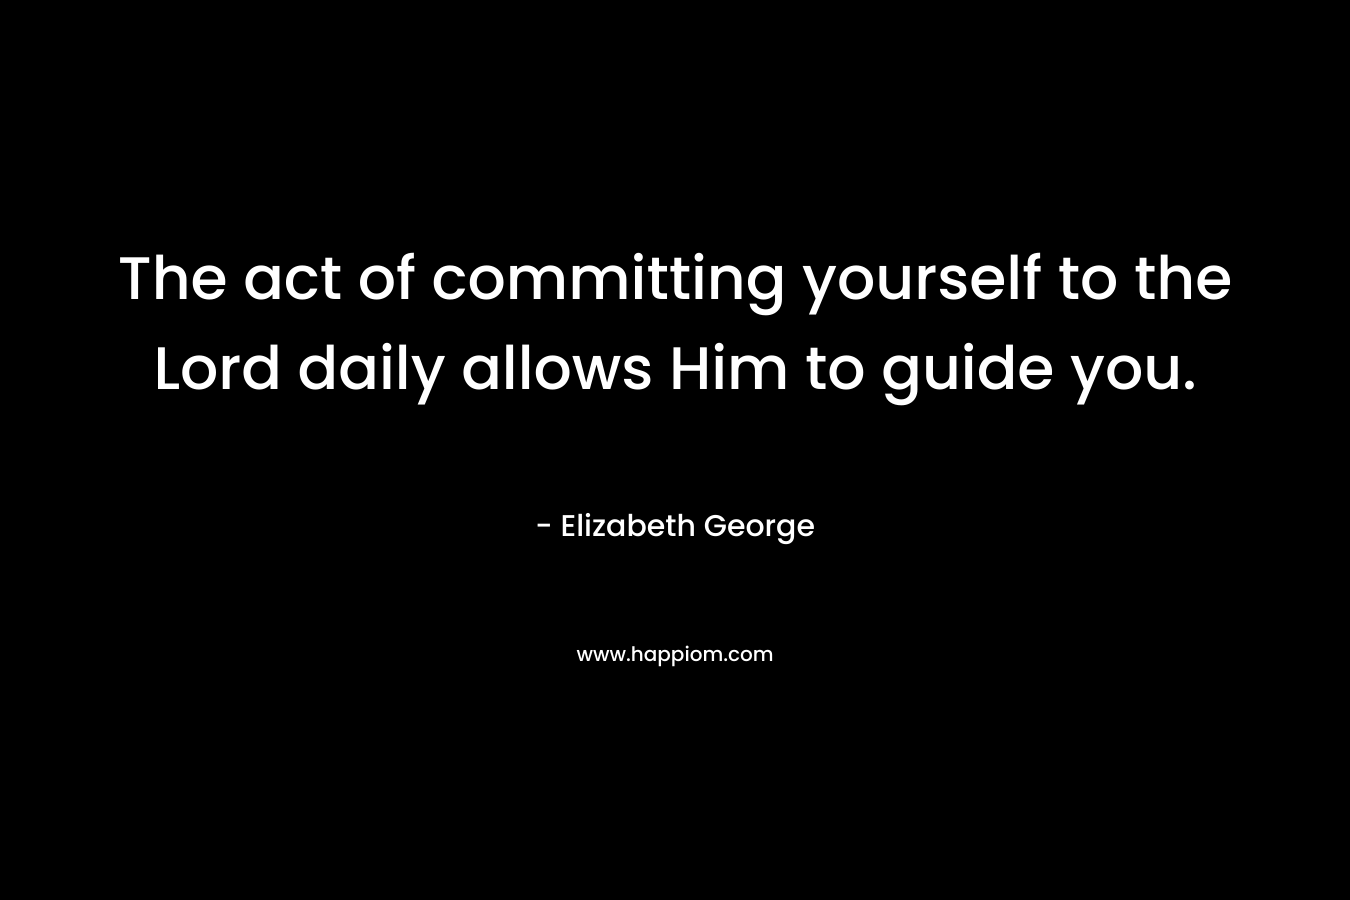 The act of committing yourself to the Lord daily allows Him to guide you.